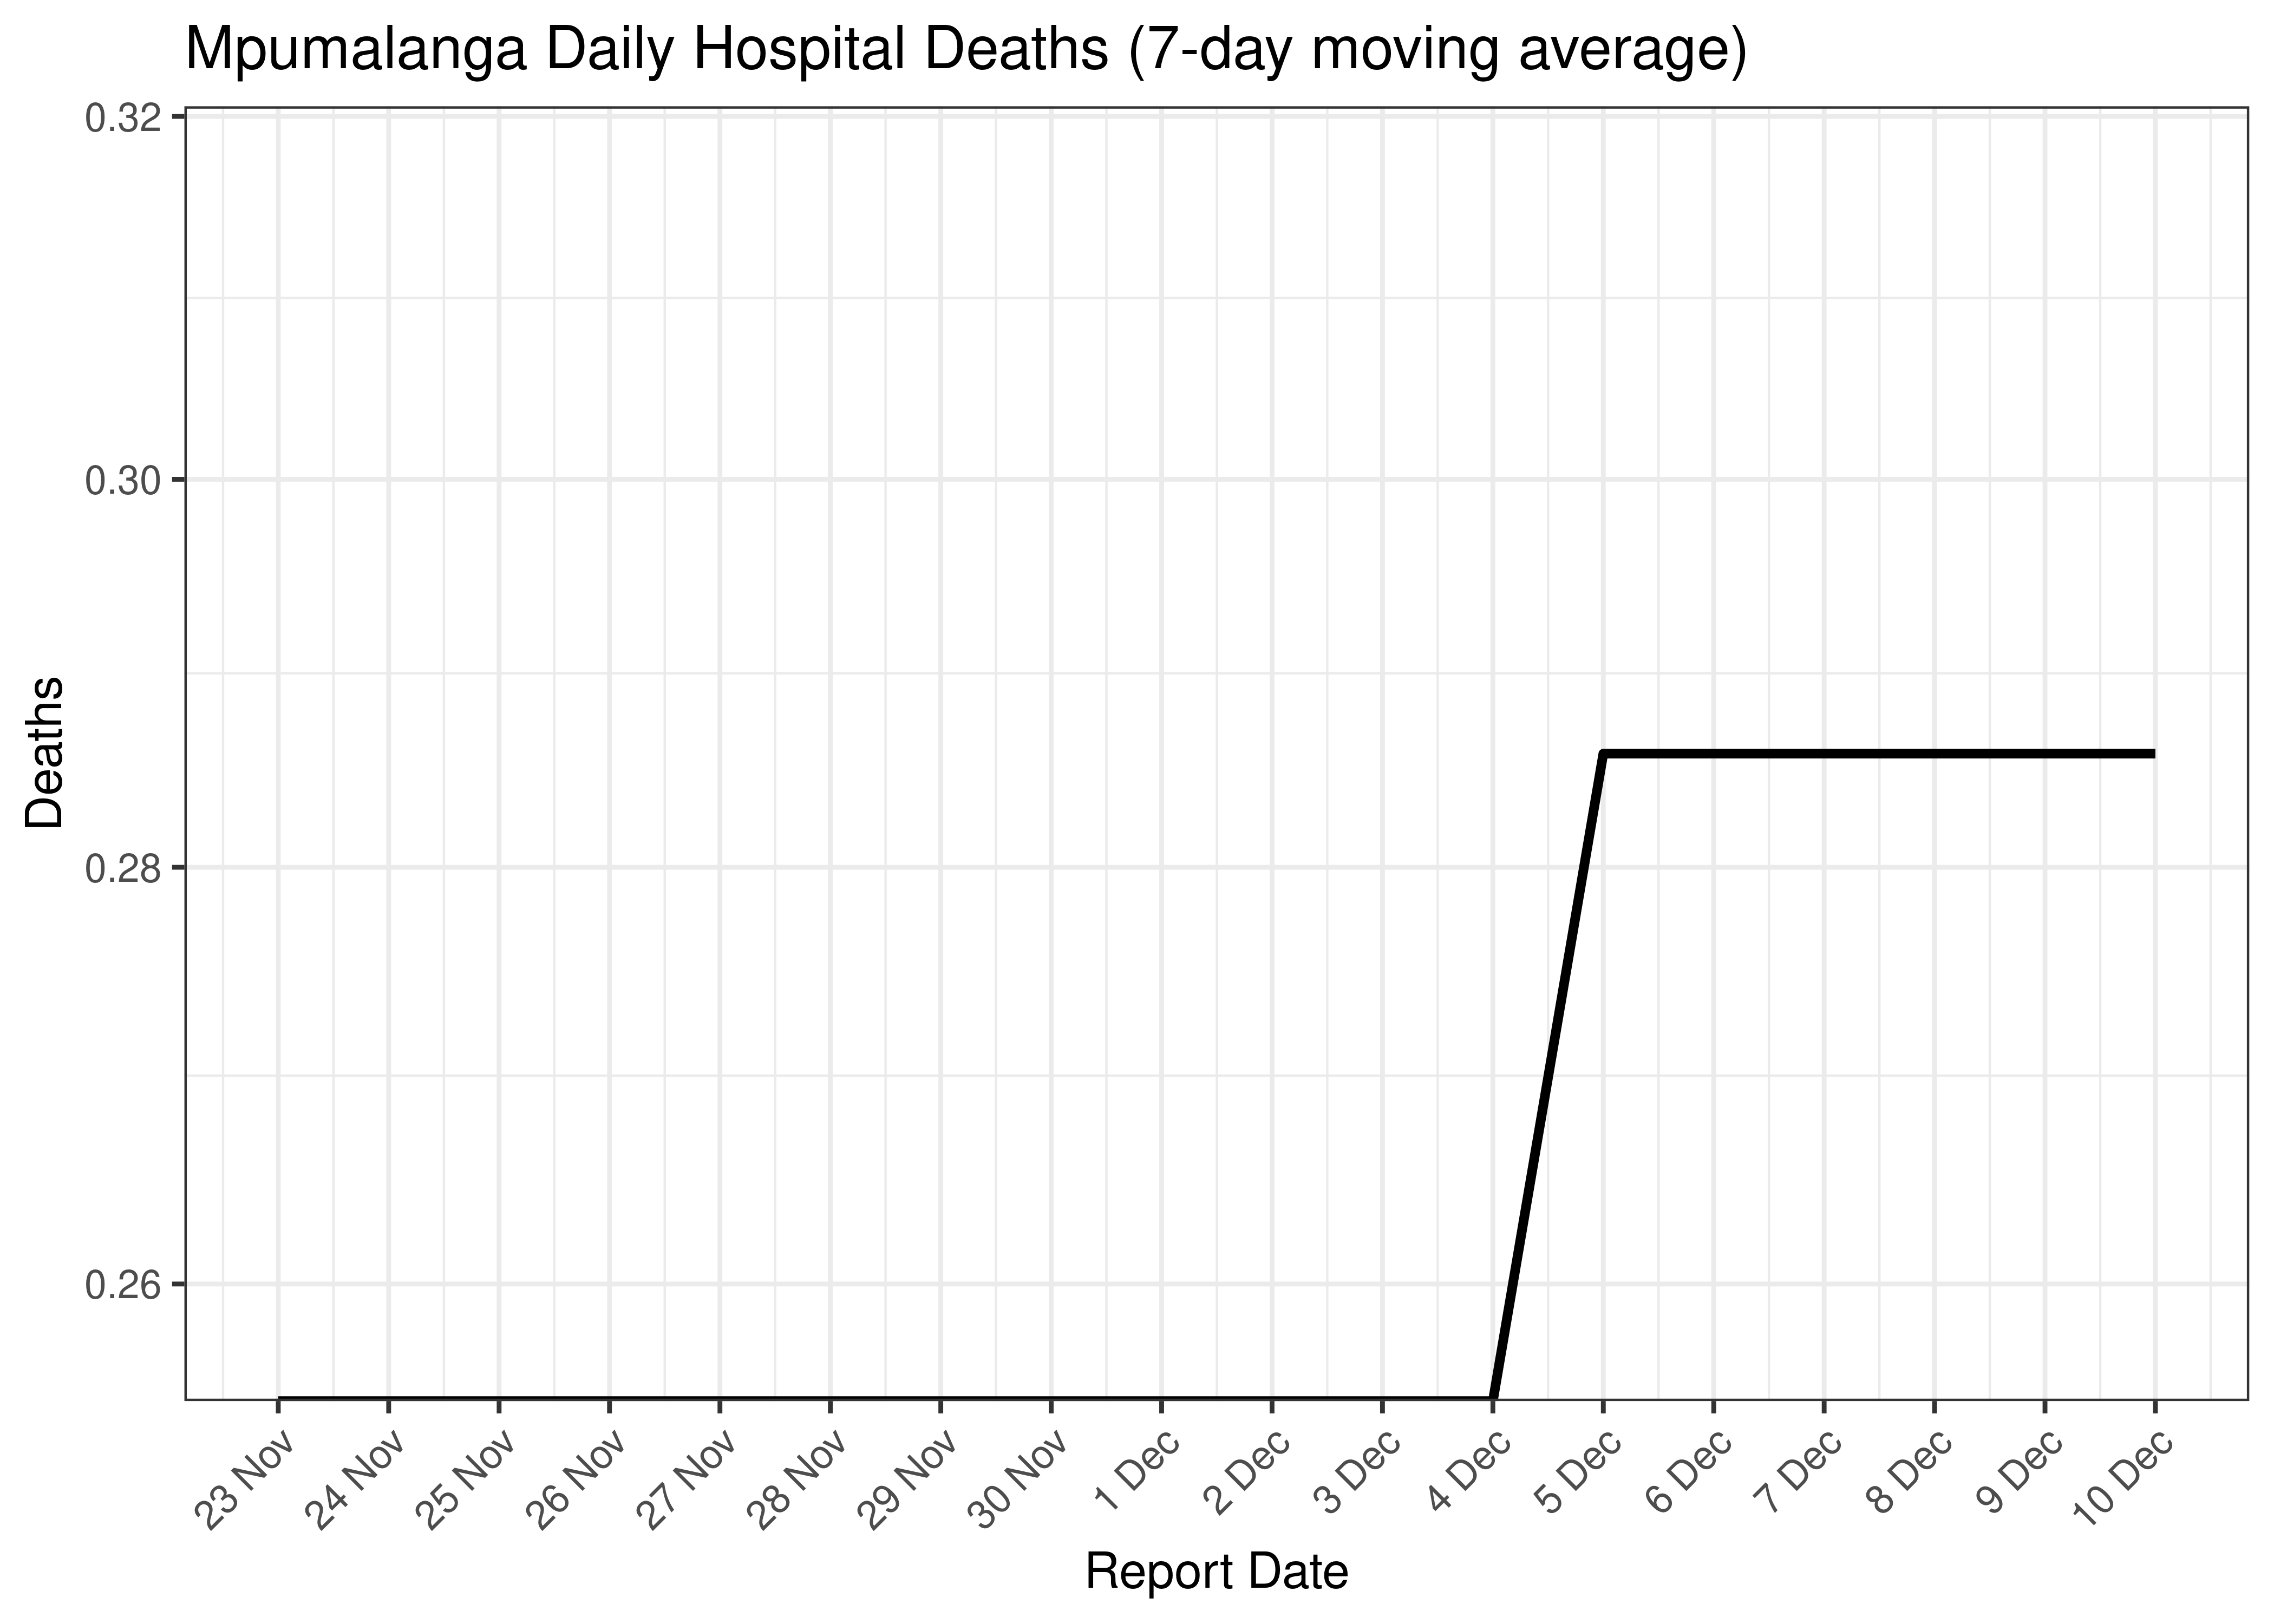 Mpumalanga Daily Hospital Deaths for Last 30-days (7-day moving average)